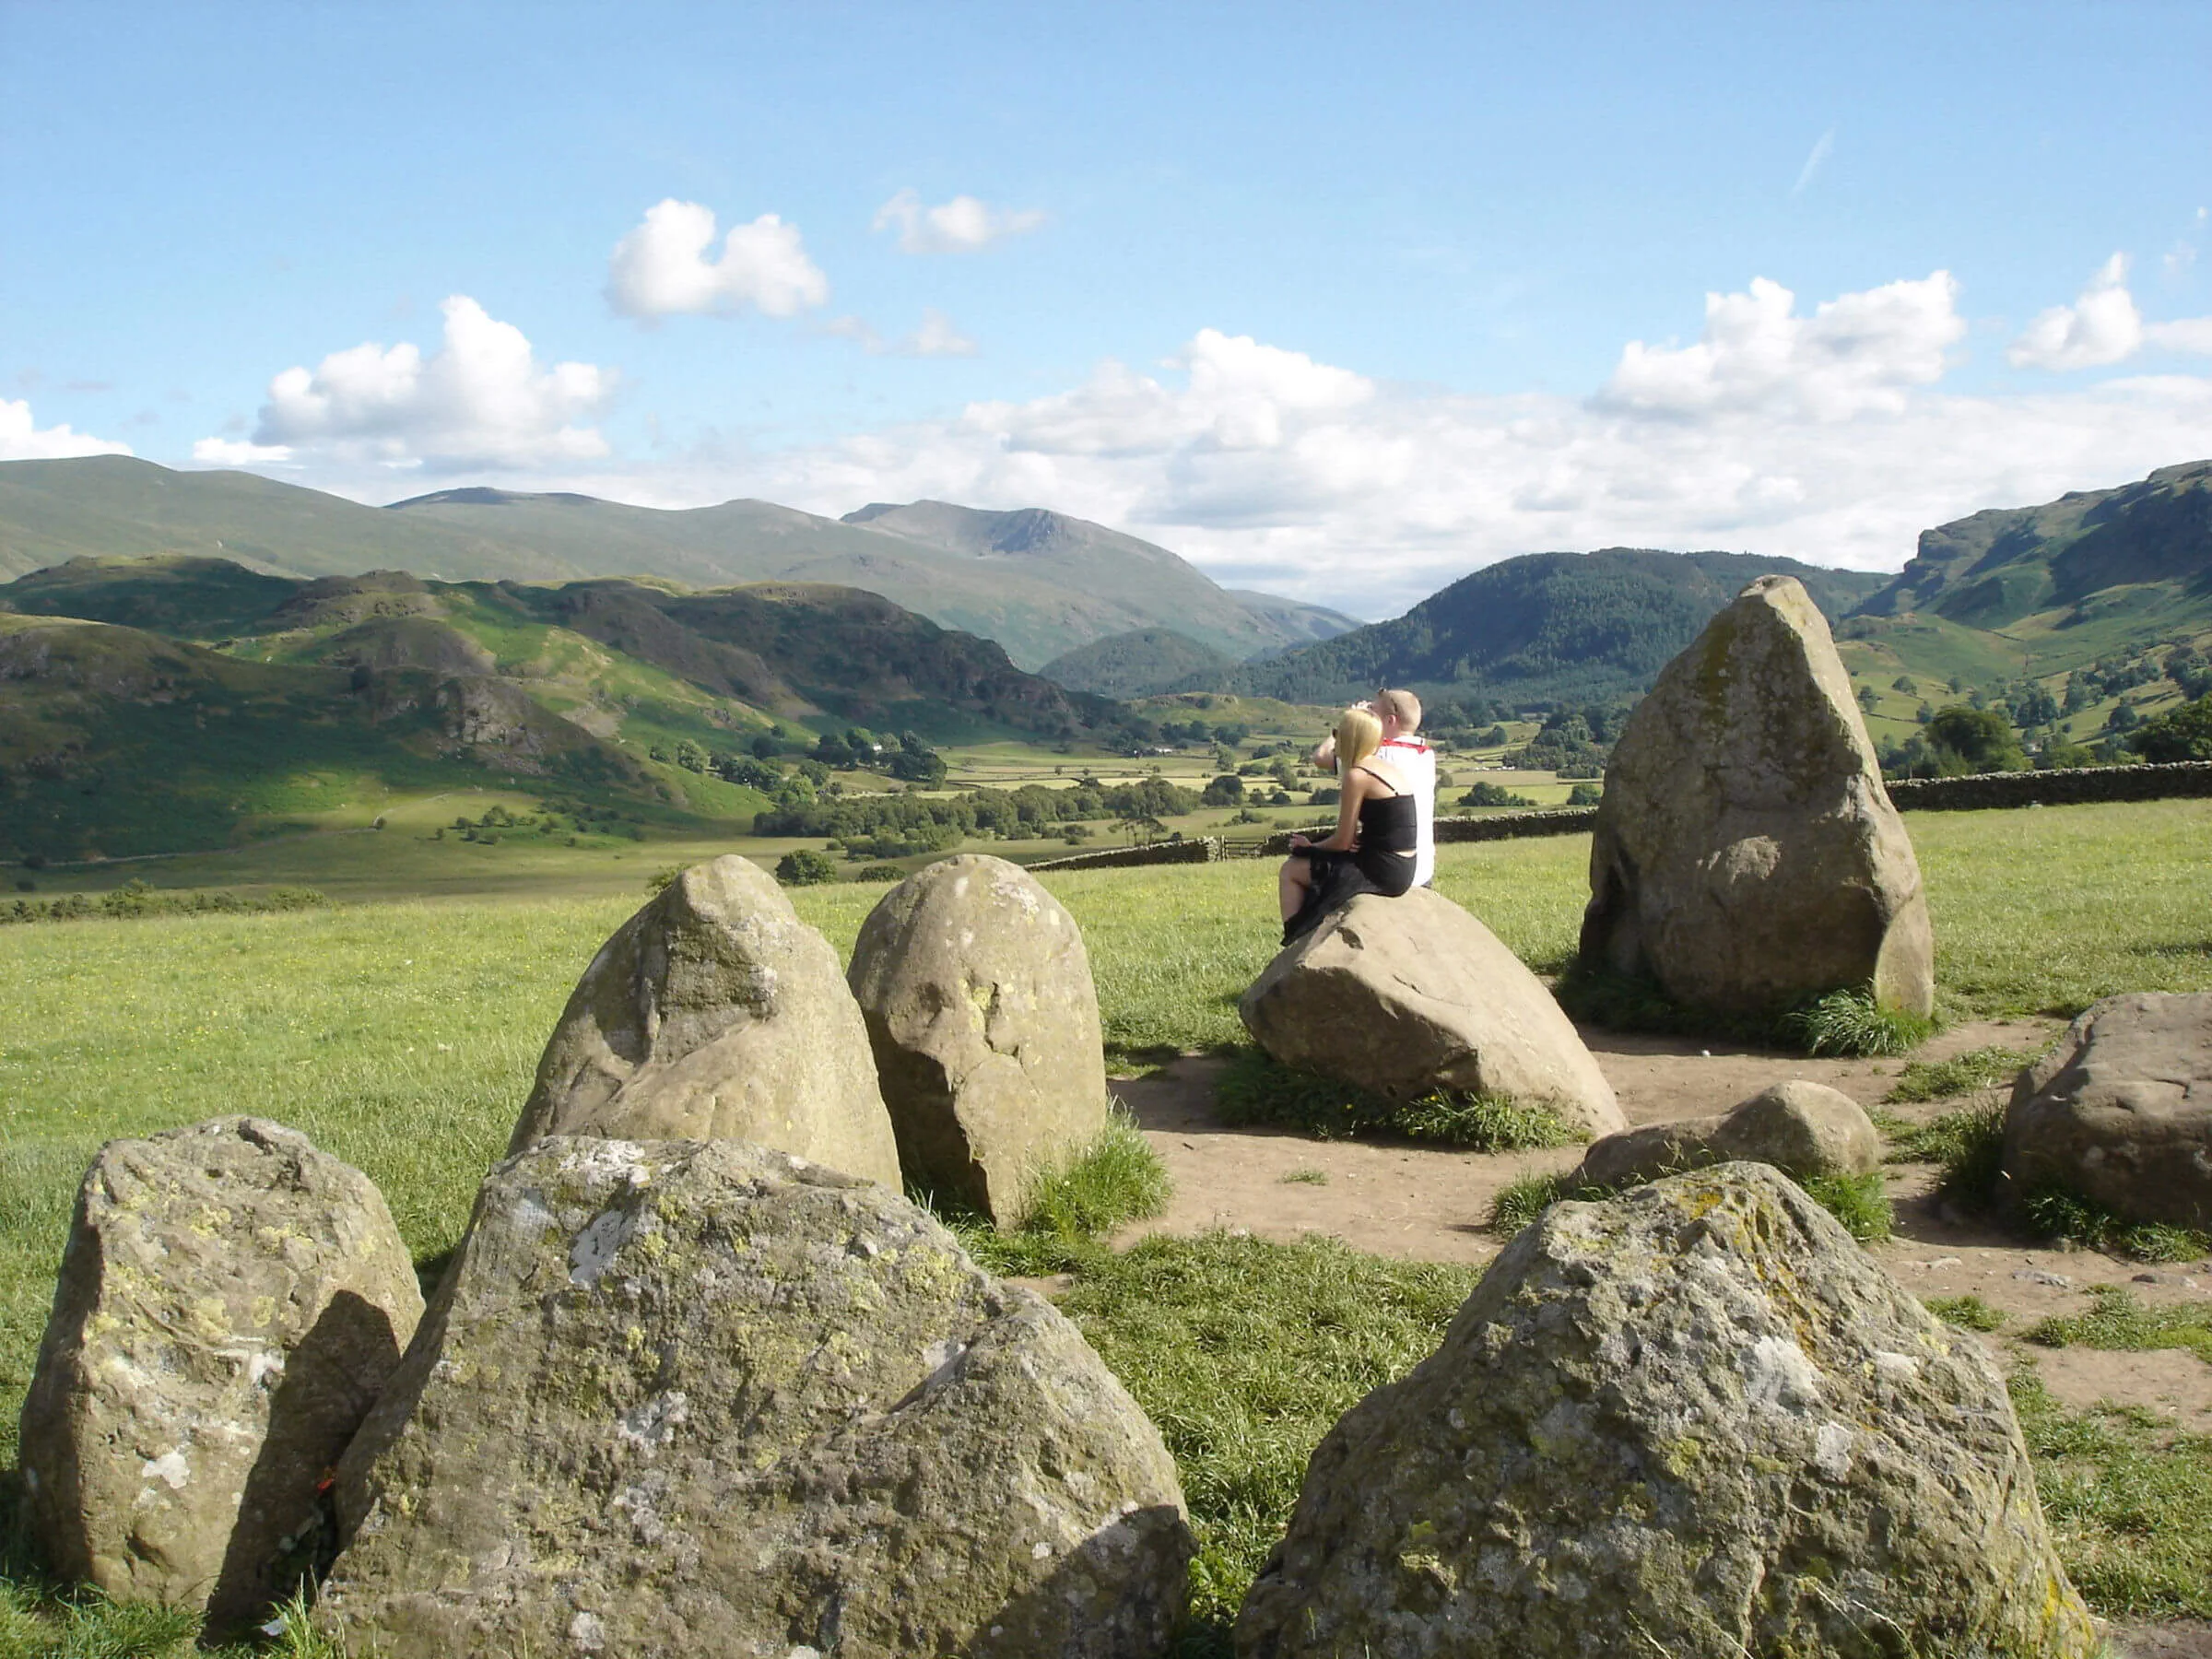 Sitting on a stone at the Castlerigg circle, in England’s Lake District, inspires contemplation